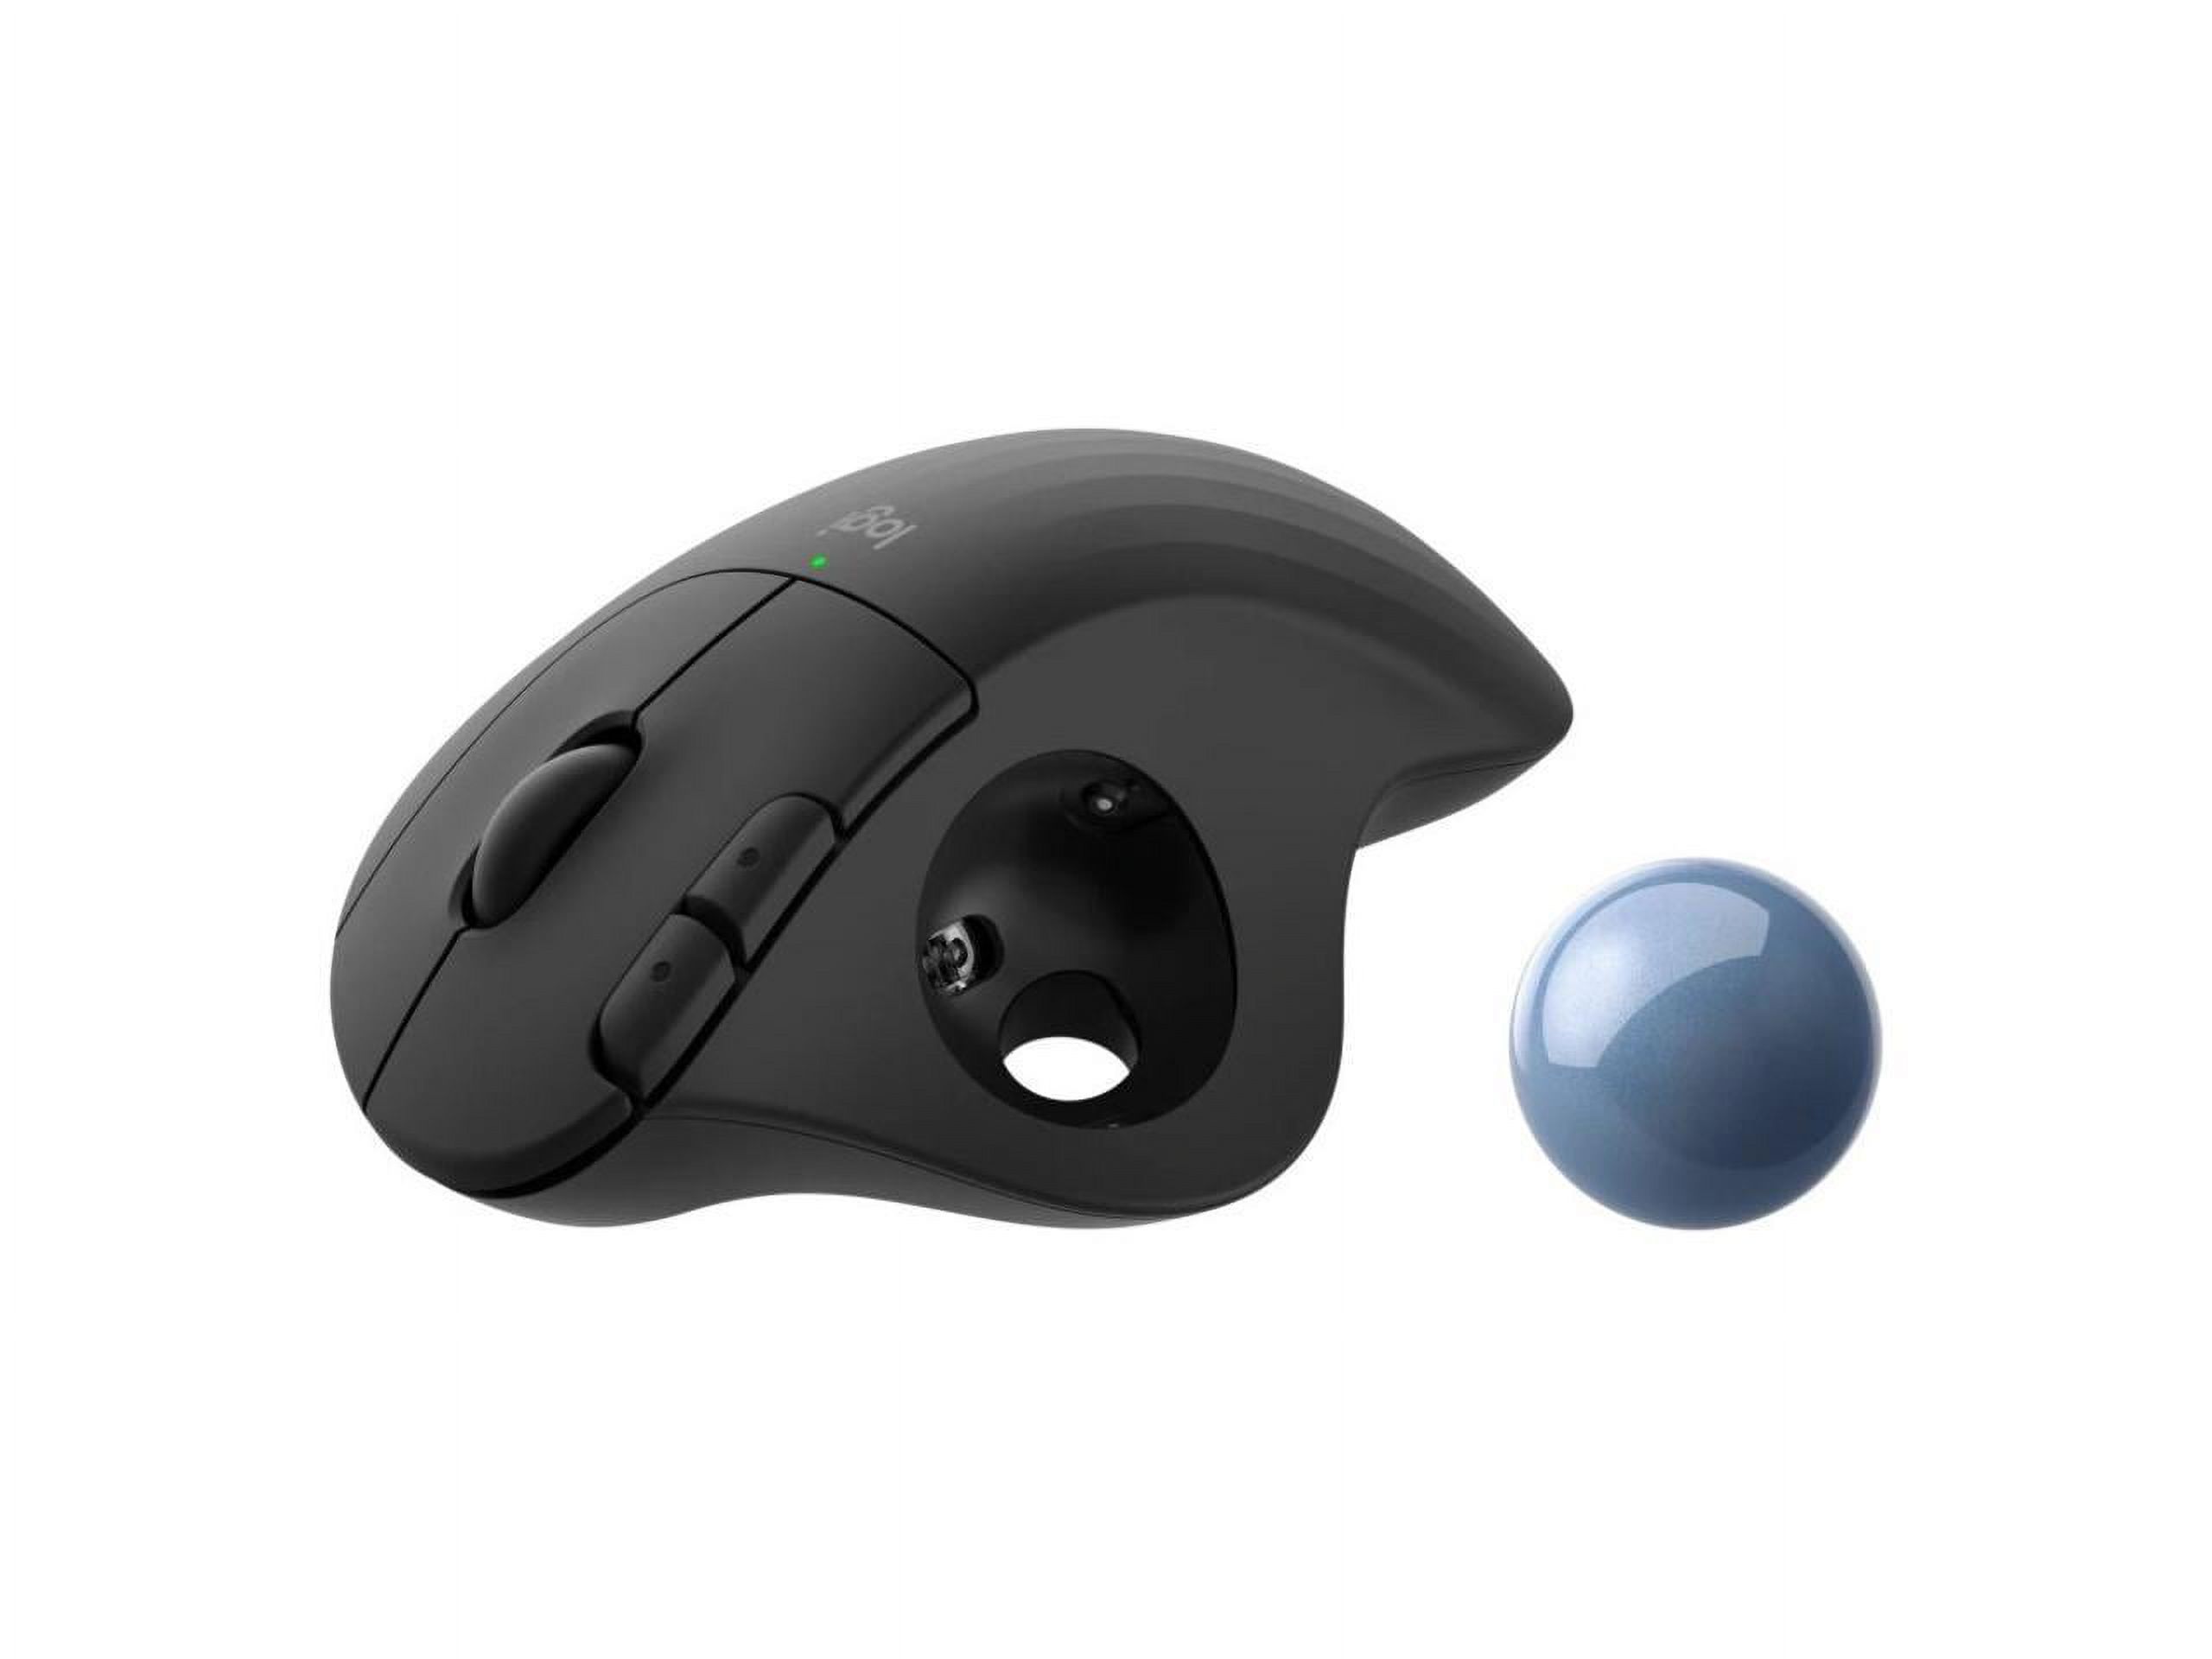 Logitech ERGO M575 Wireless Trackball Mouse - Easy thumb control, precision and smooth tracking, ergonomic comfort design, for Windows, PC and Mac with Bluetooth and USB capabilities (Black) - Opti... - image 4 of 20